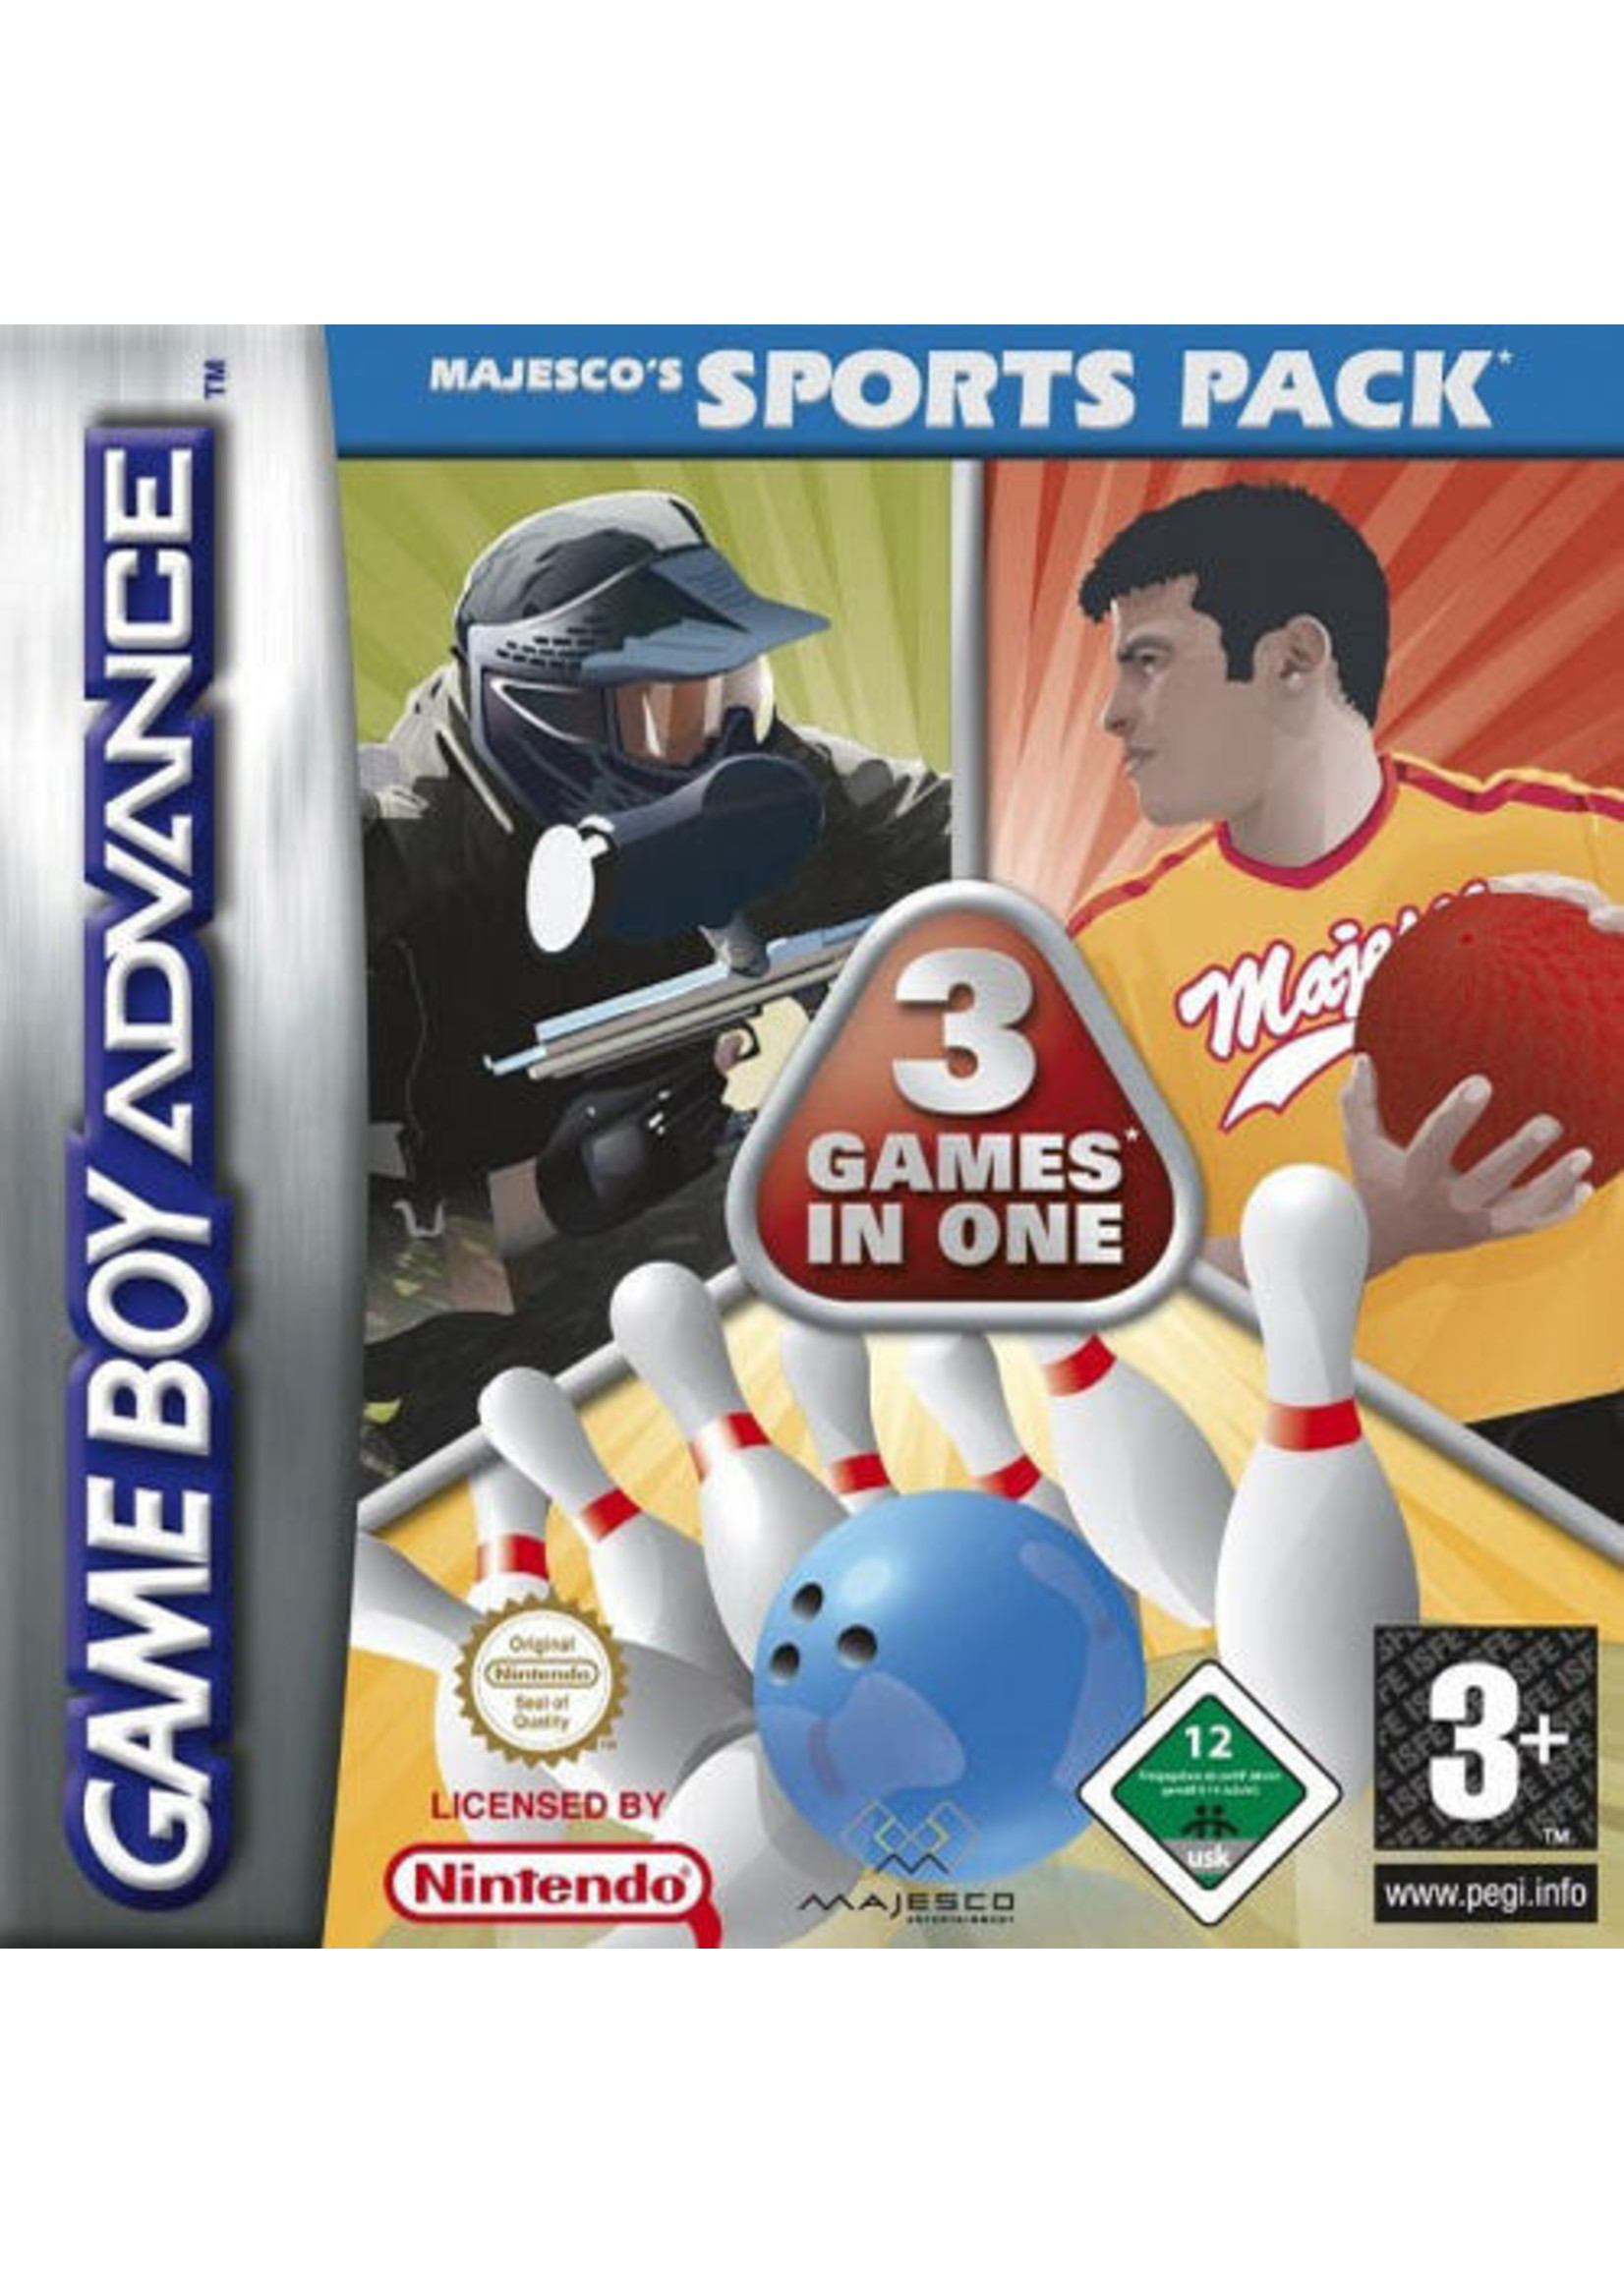 Nintendo Gameboy Advance 3-in-1 Sports Pack